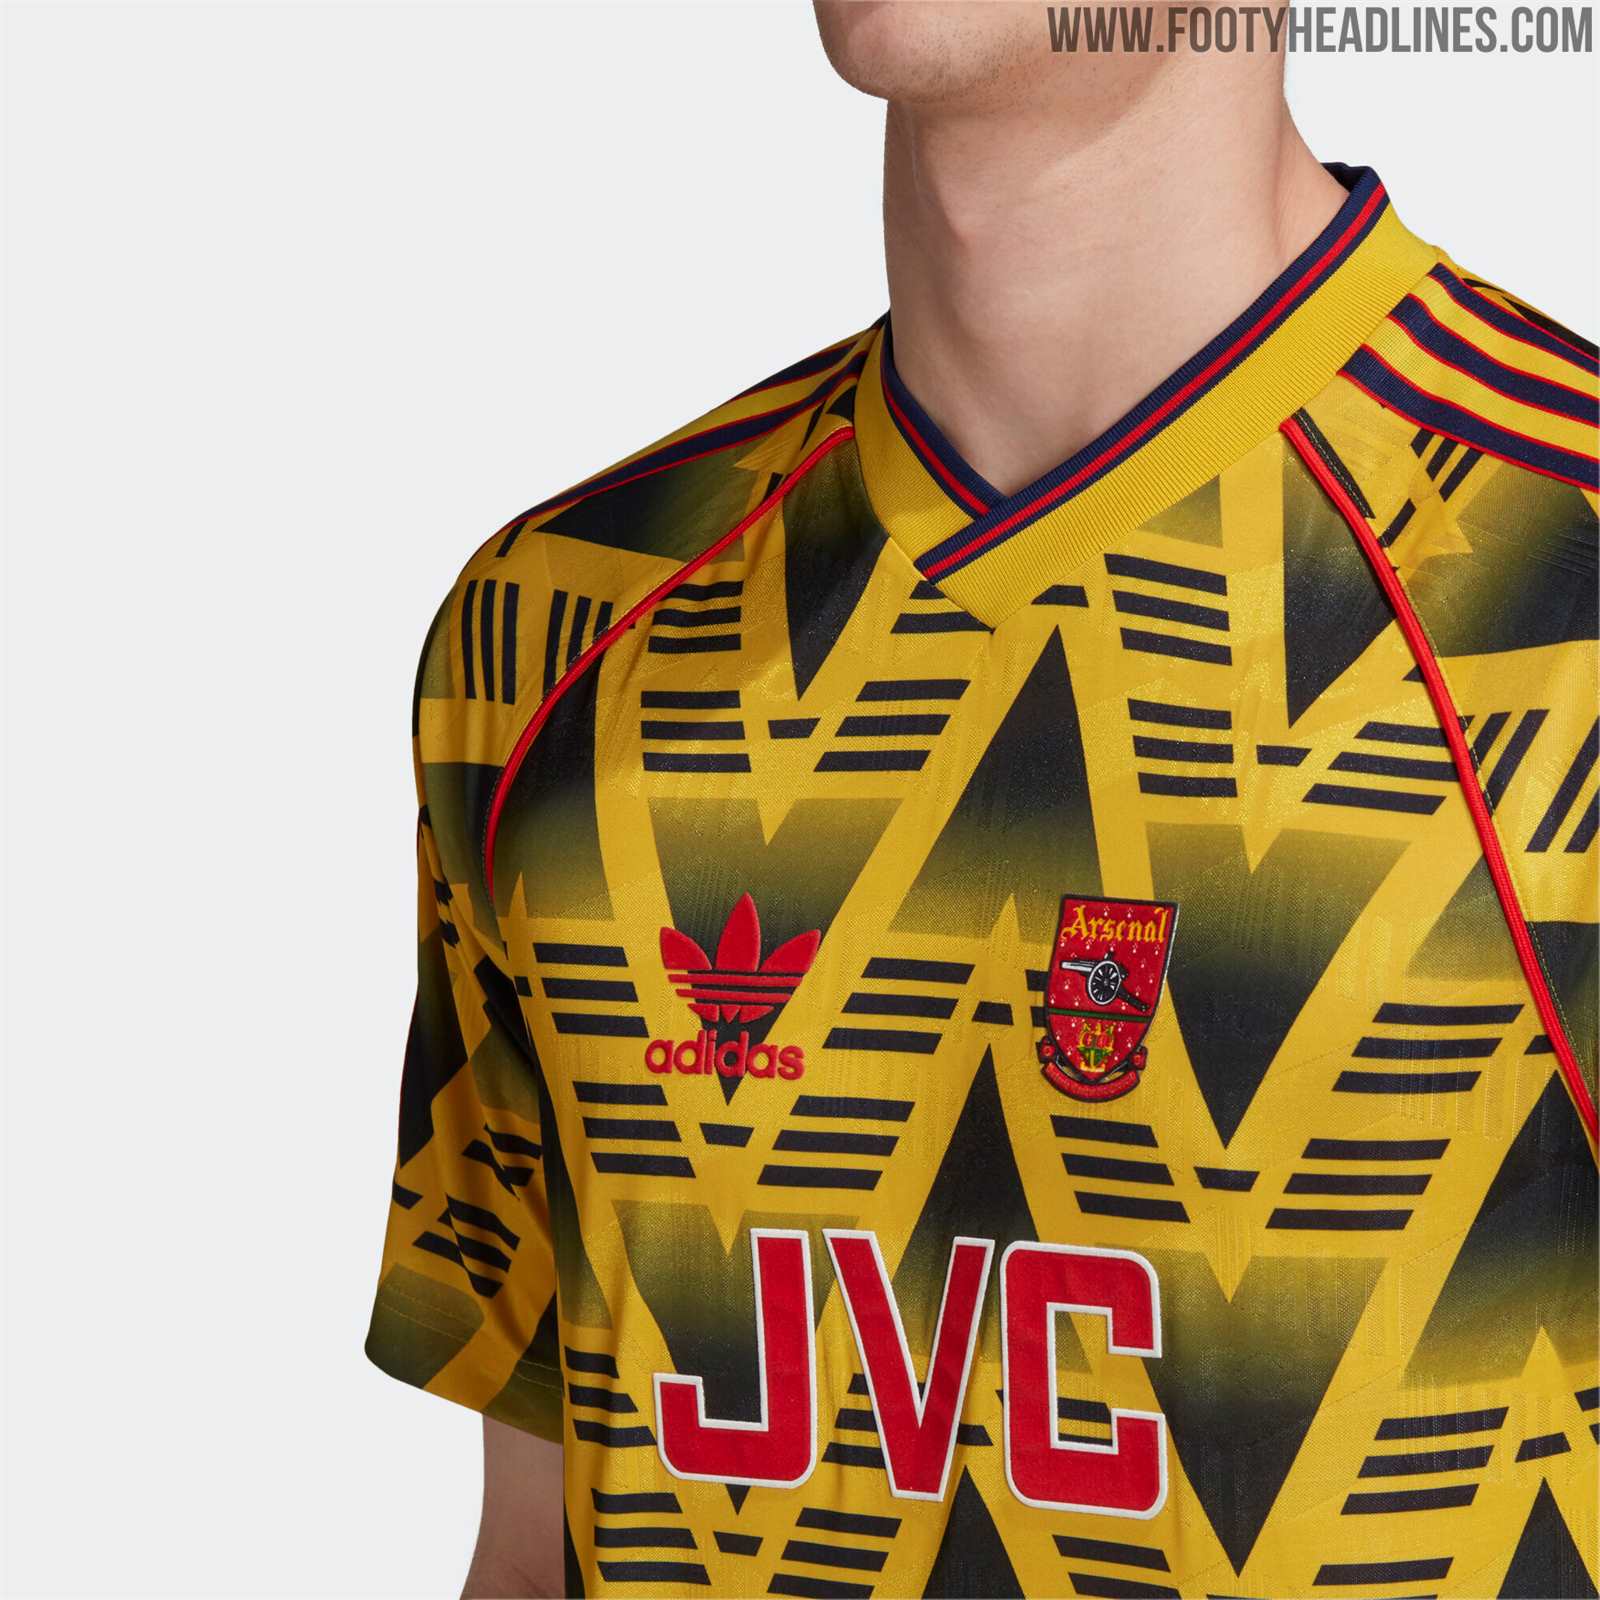 Arsenal - Bruised Banana Range - inspired by one of the